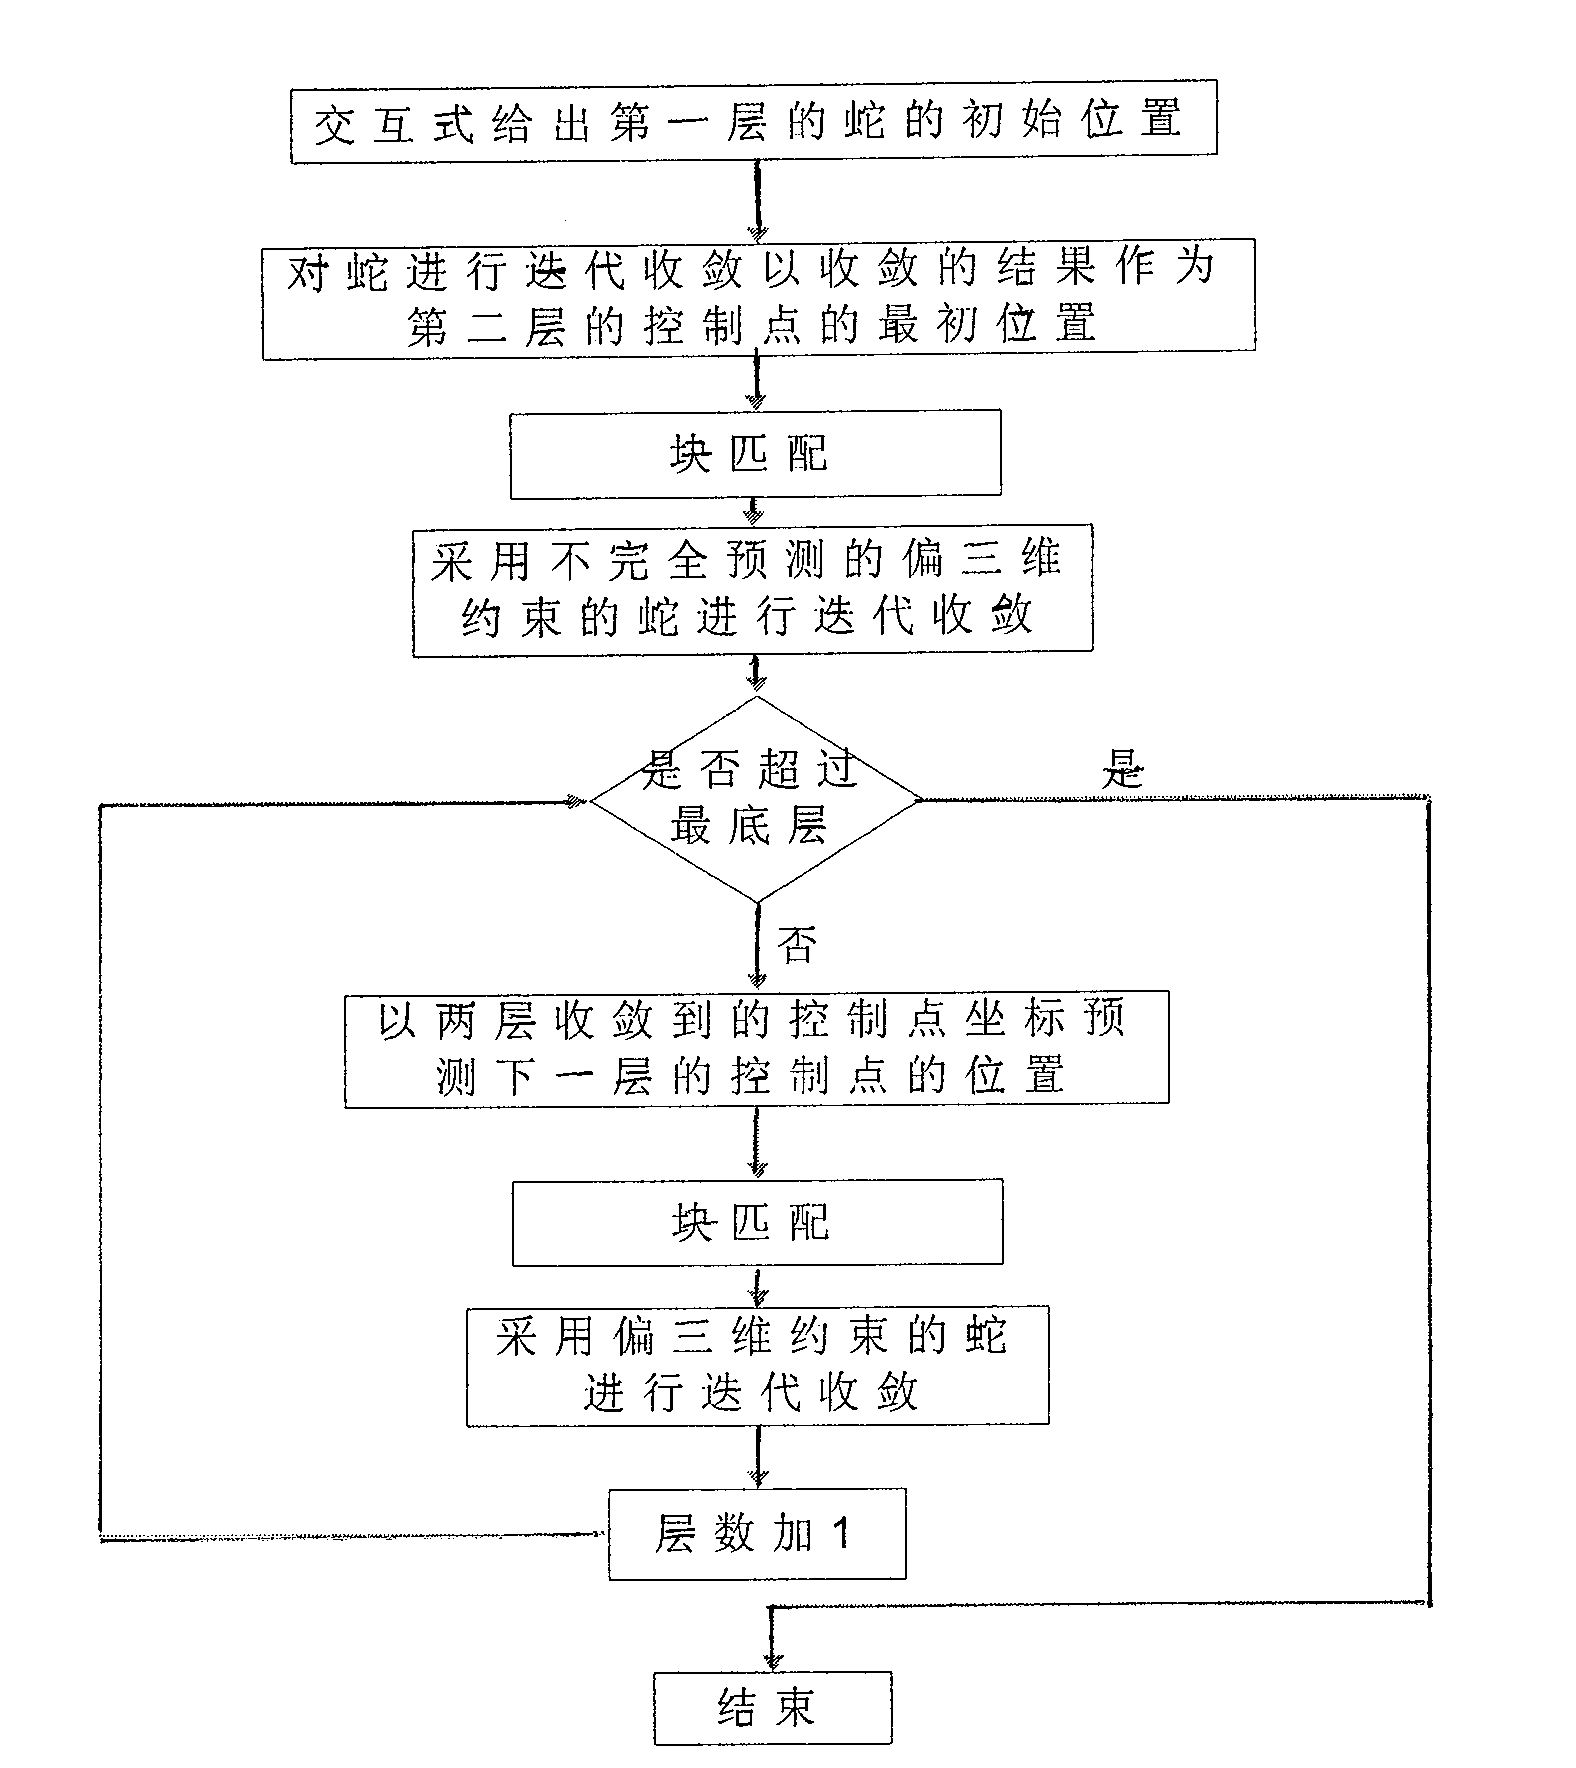 Method for sequence image segmentation based on movement forecast and three-dimensional constraining